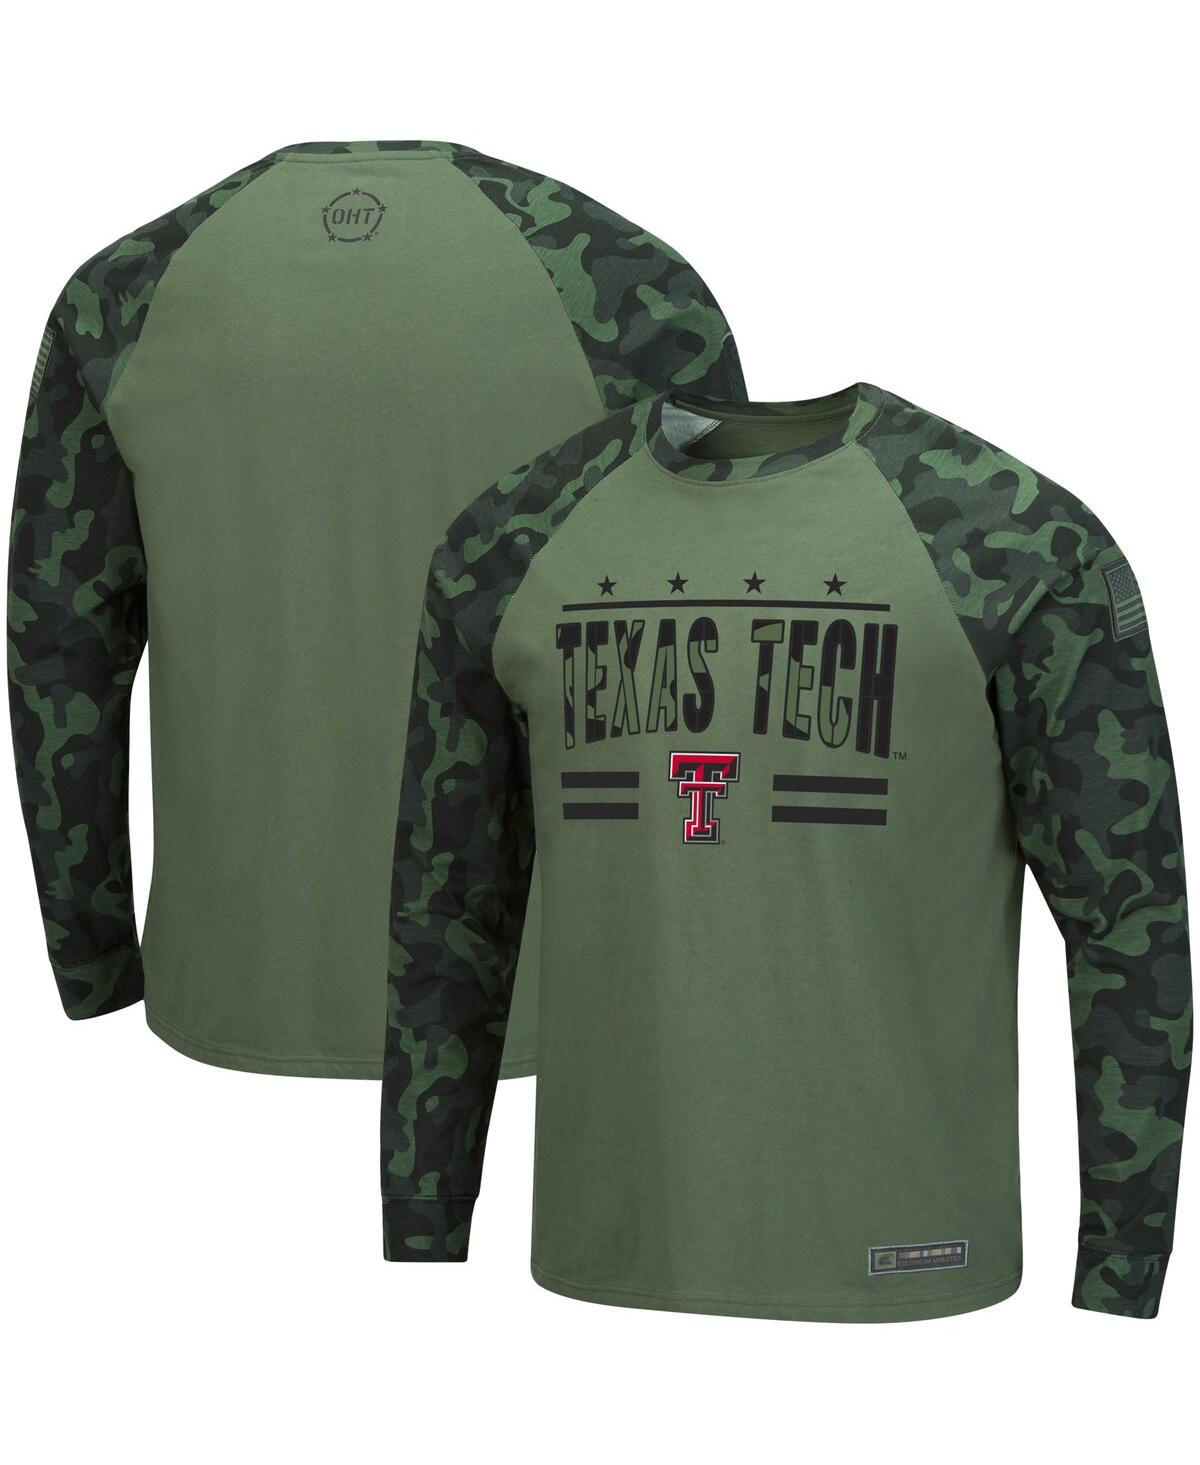 Men's Colosseum Olive, Camo Texas Tech Red Raiders Oht Military-inspired Appreciation Raglan Long Sleeve T-shirt - Olive, Camo